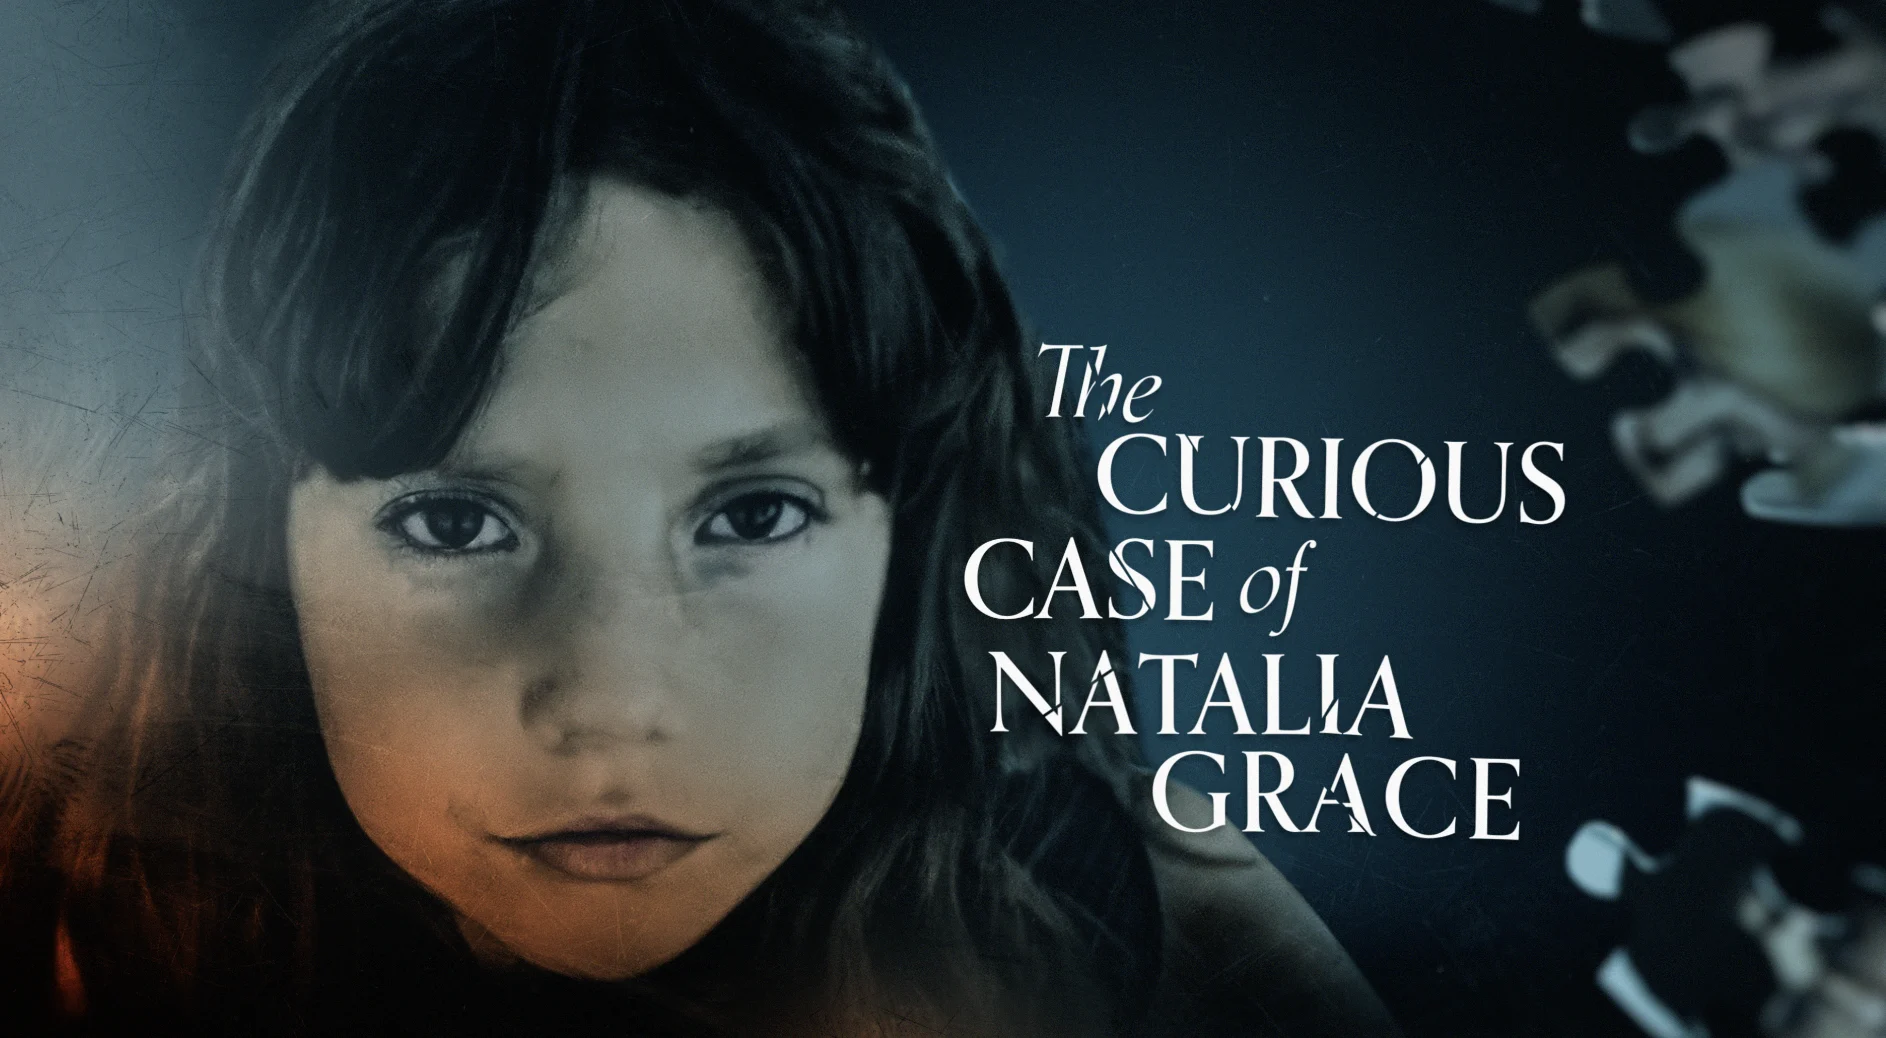 The title sequence we designed for the stranger-than-fiction series ‘The Curious Case of Natalia Grace’ from Investigation Discovery, sets the stage for the exploration of the question of whether Natalia Barnett is an exploited Ukrainian child suffering from dwarfism or a dangerous adult dwarf masquerading as a child.